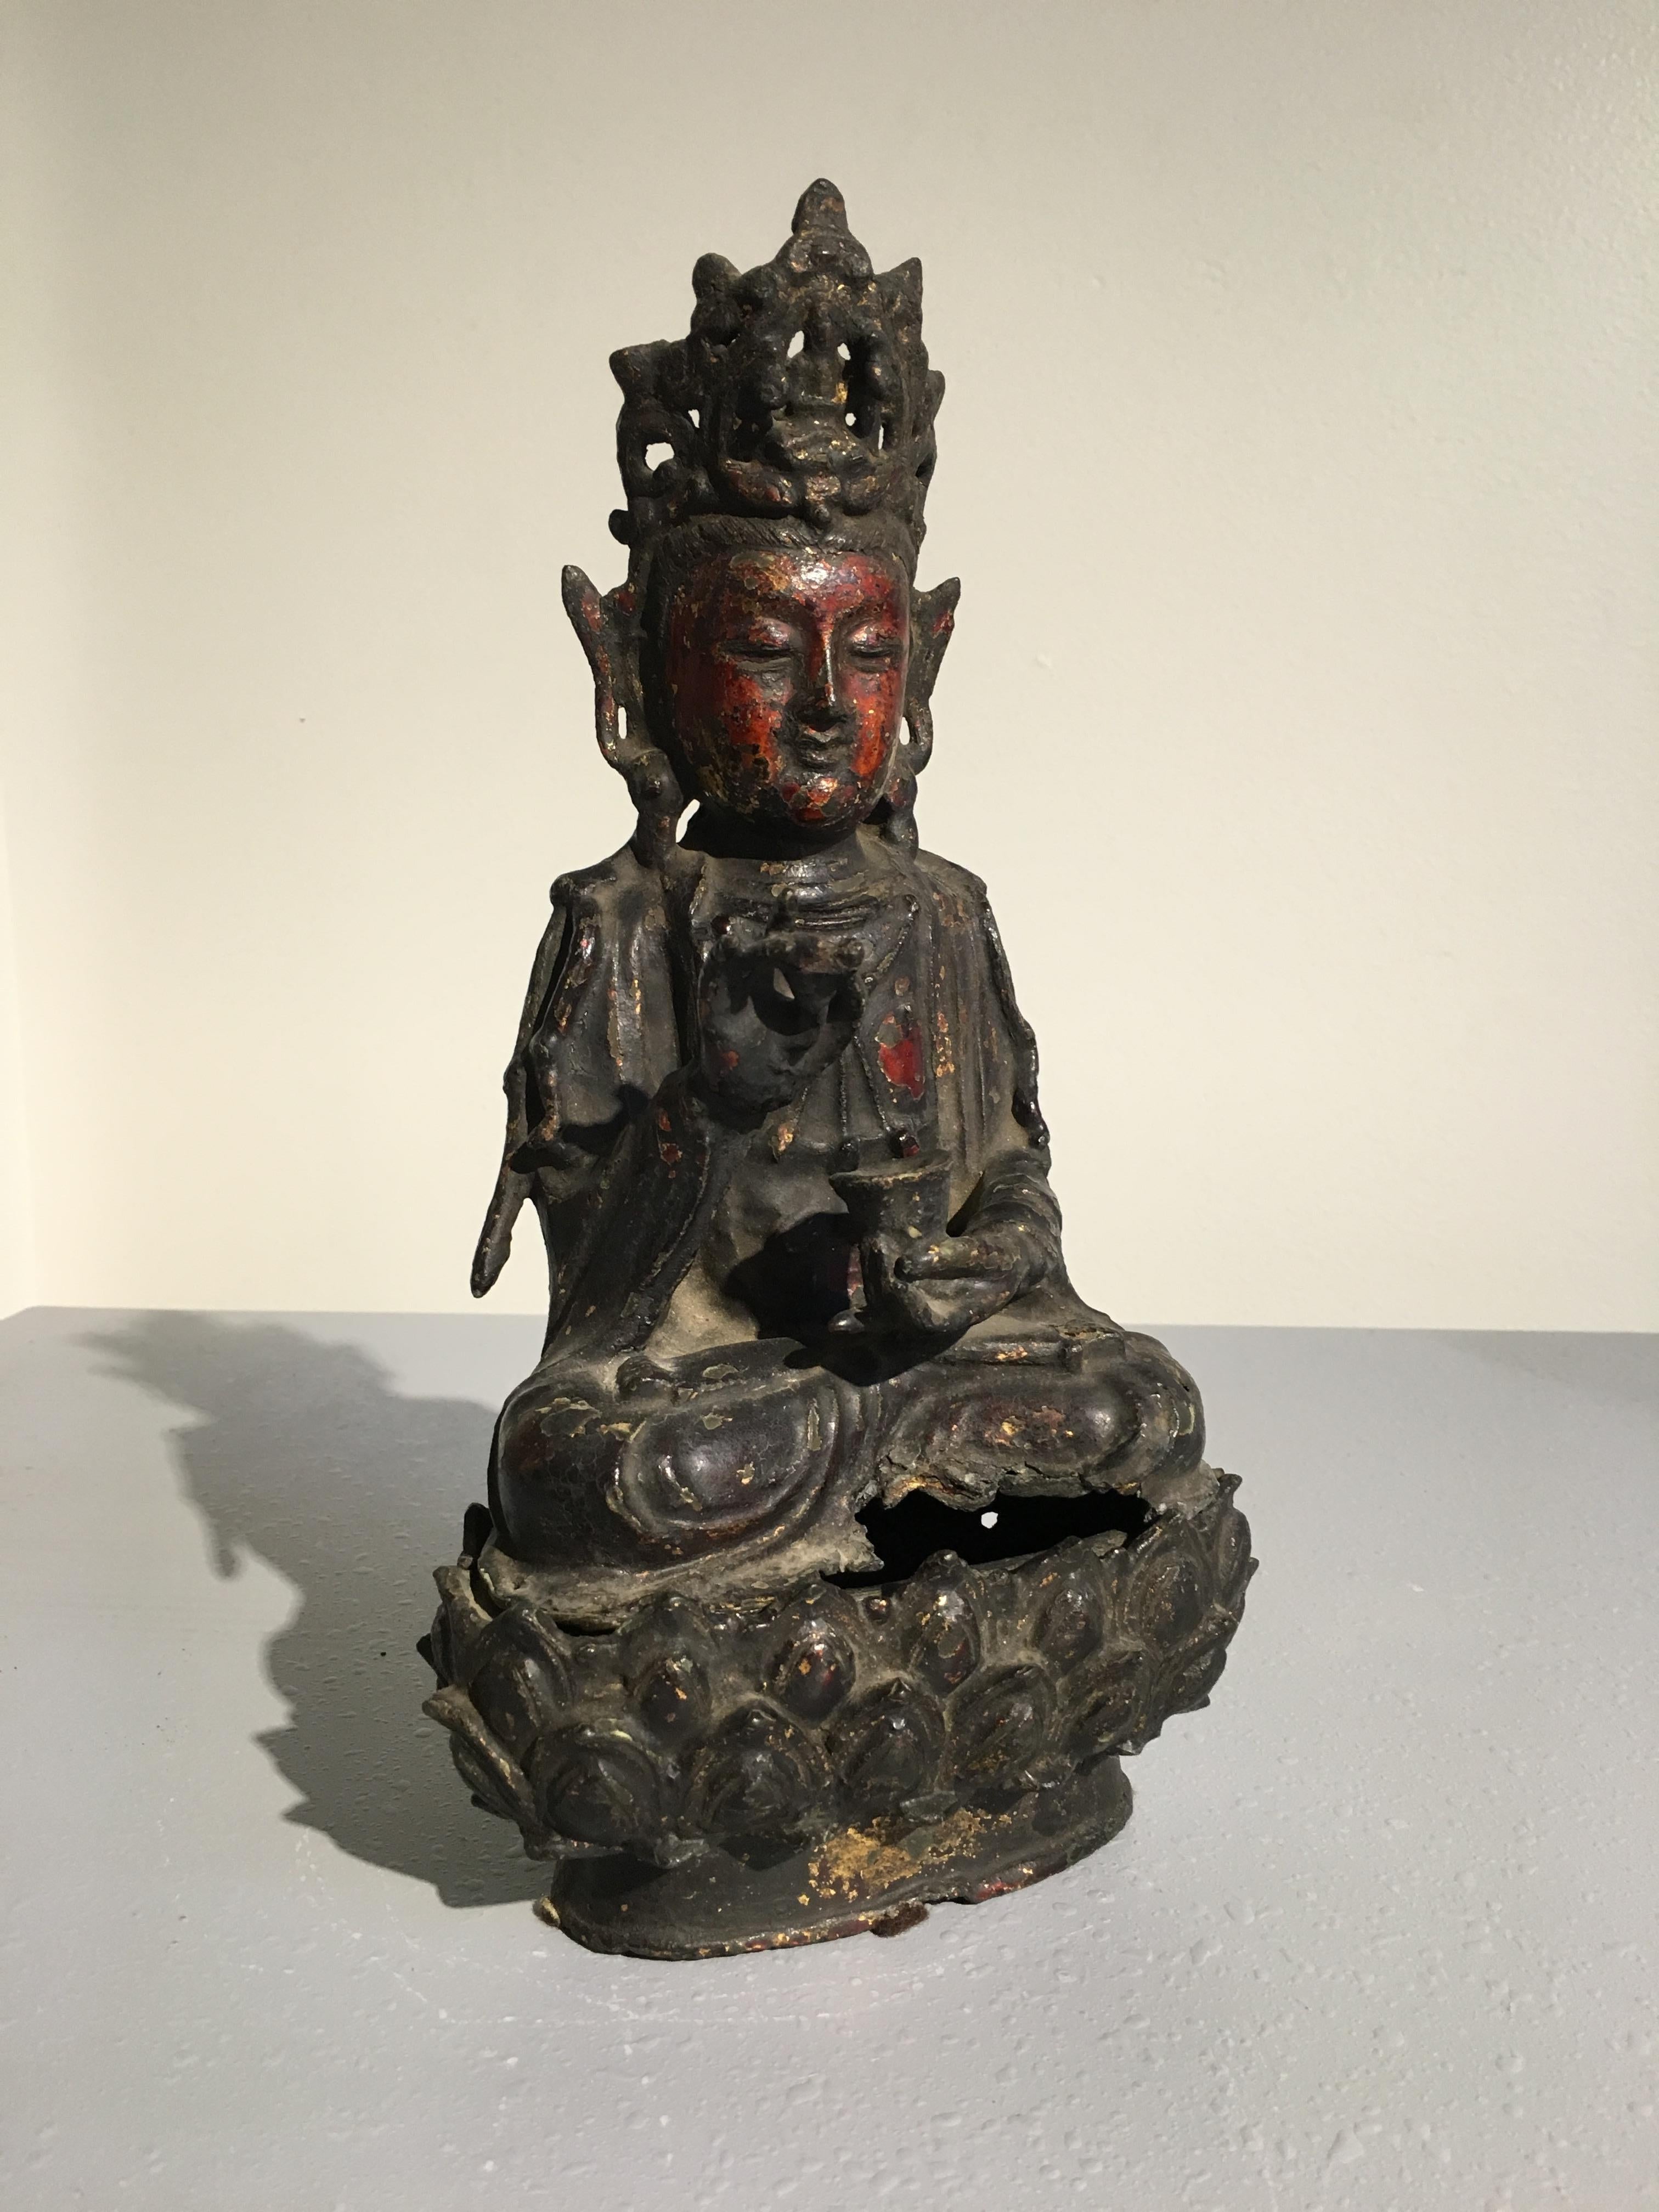 Chinese late Ming dynasty bronze figure of the Bodhisattva Avalokiteshvara, also known as Guanyin (Quan Yin, Kwan Yin, Kuan Yin), 17th century, China 

The figure well cast in two parts, with remnants of rich lacquer and gilding throughout, much